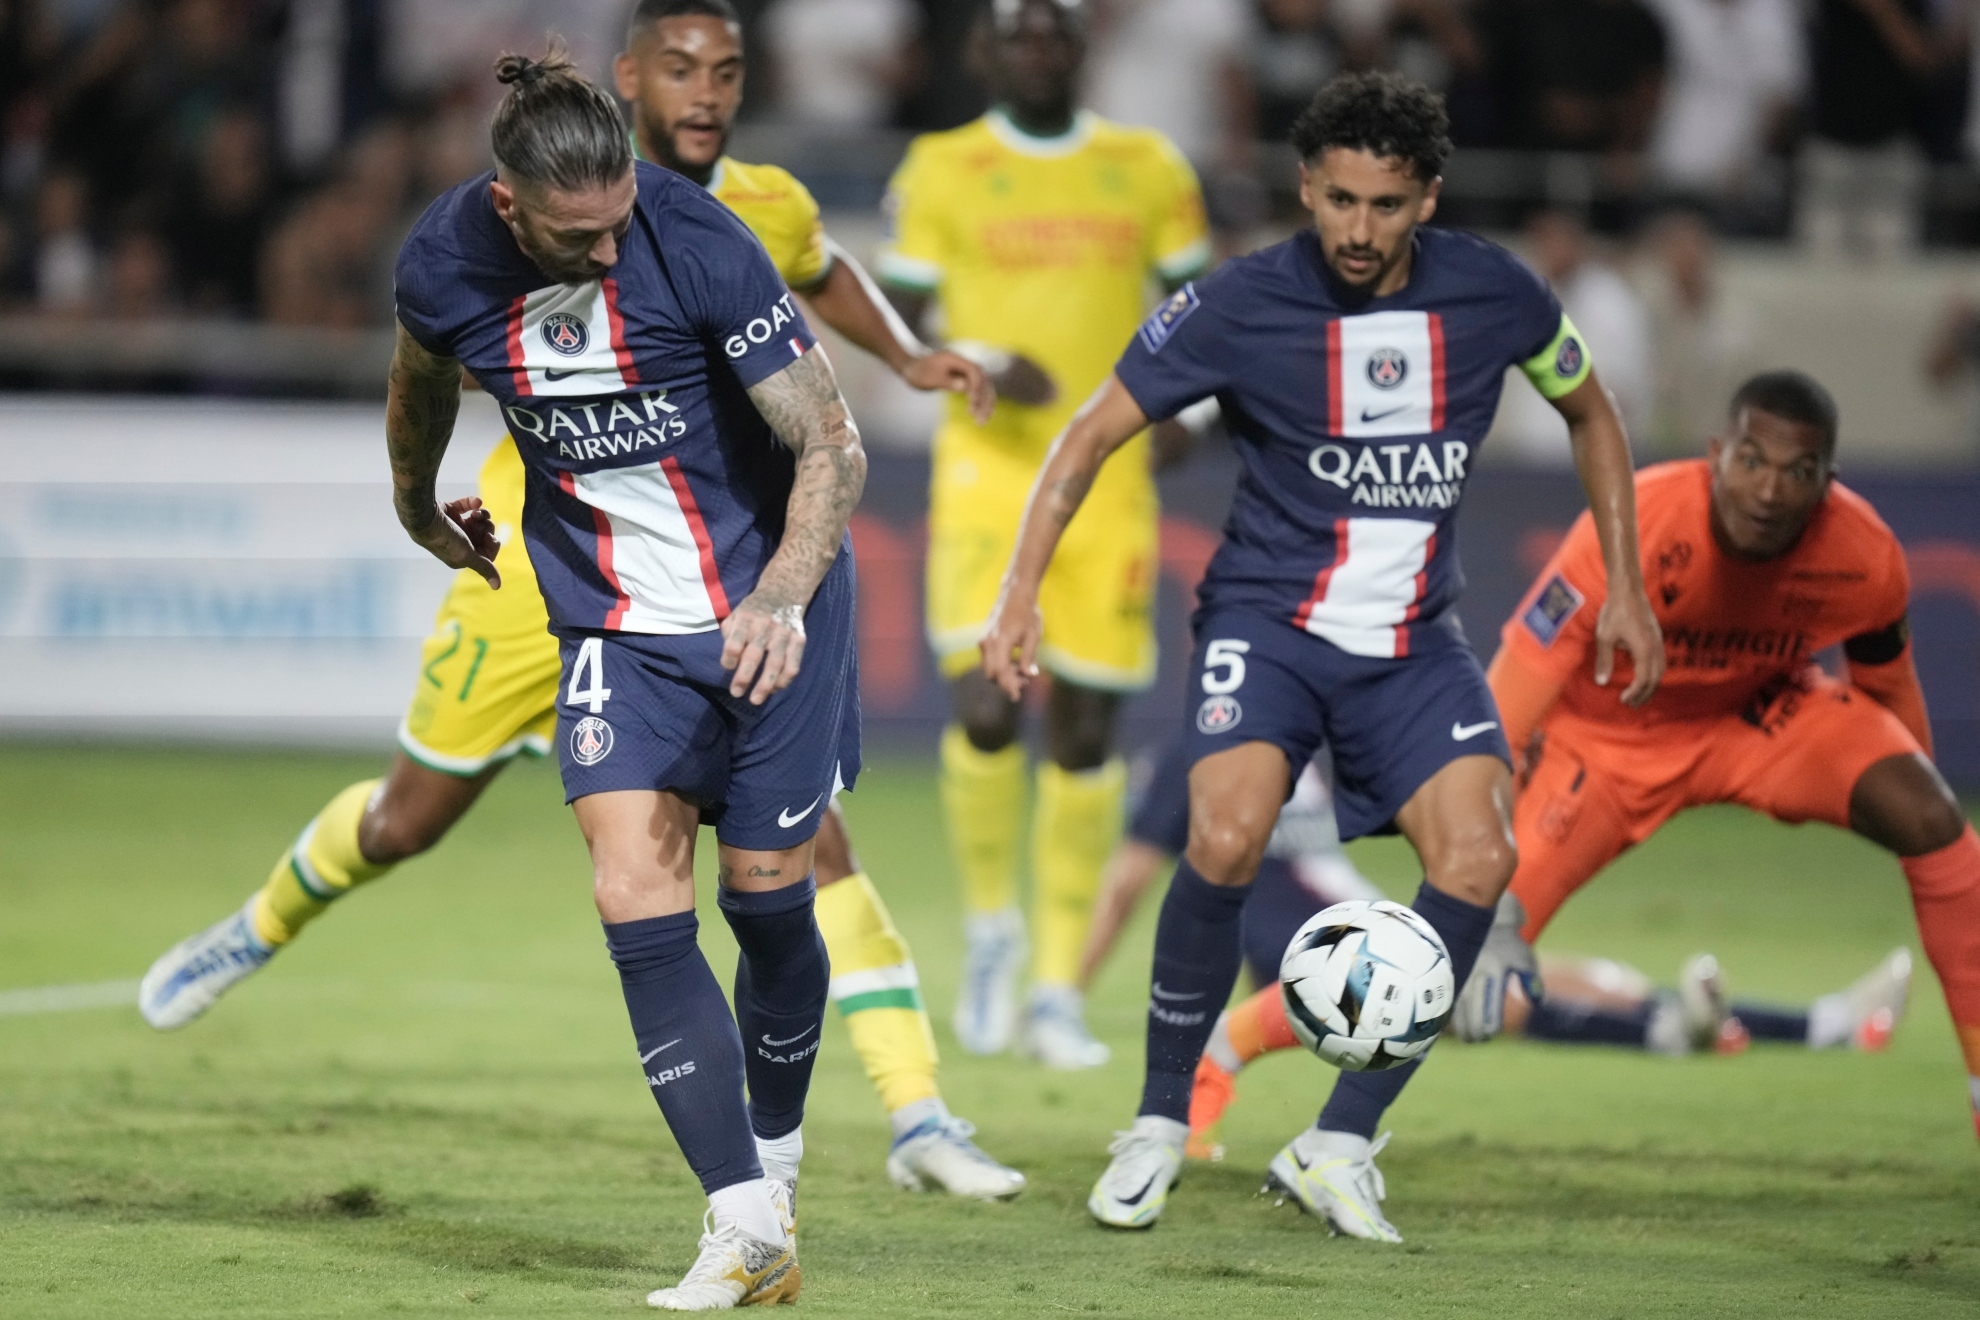 Sergio Ramos against Nantes in the Trophée des Champions